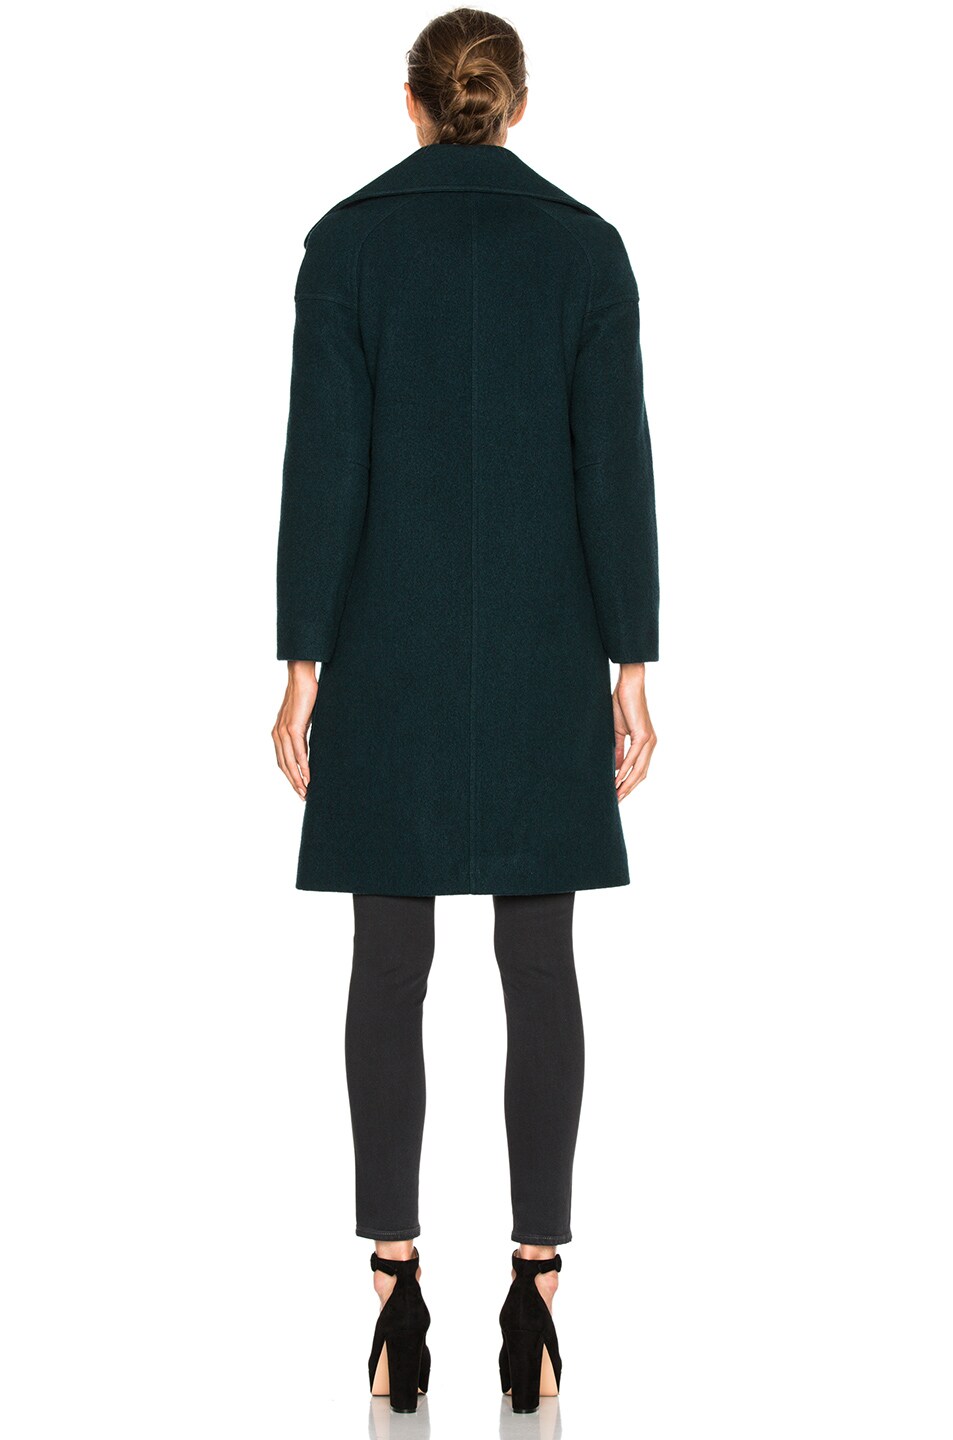 M.I.H JEANS Richards Double-Breasted Wool Coat, Bottle-Green | ModeSens